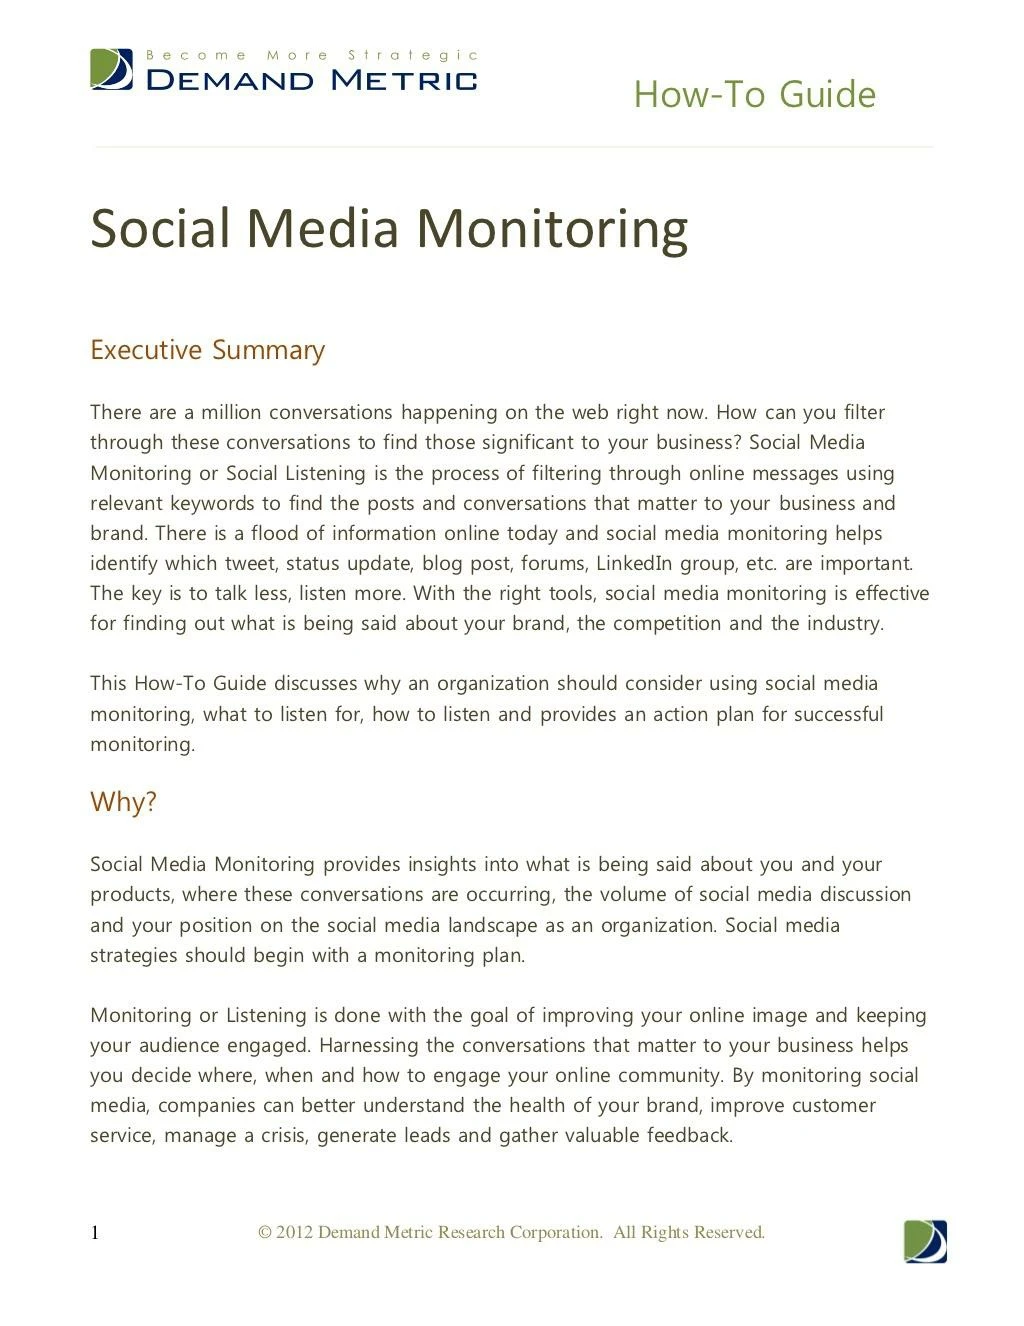 social media monitoring how to guide